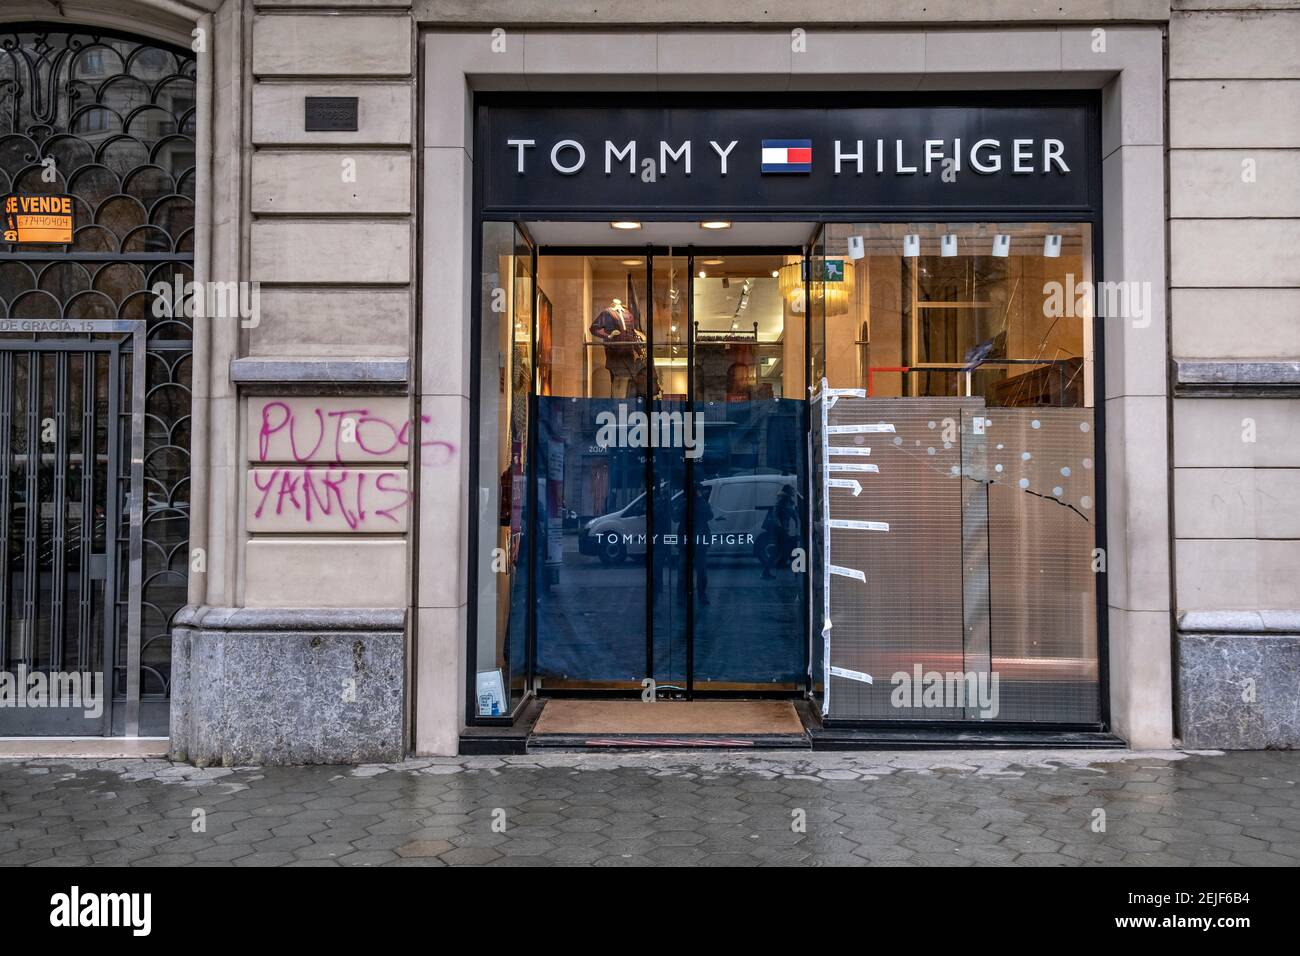 Transformator Republiek Onderhoudbaar Barcelona, Spain. 22nd Feb, 2021. The Tommy Hilfiger store on Passeig de  Gràcia is seen with anti-vandalism protections on its windows.More than 50  stores have suffered damage to their shop windows and